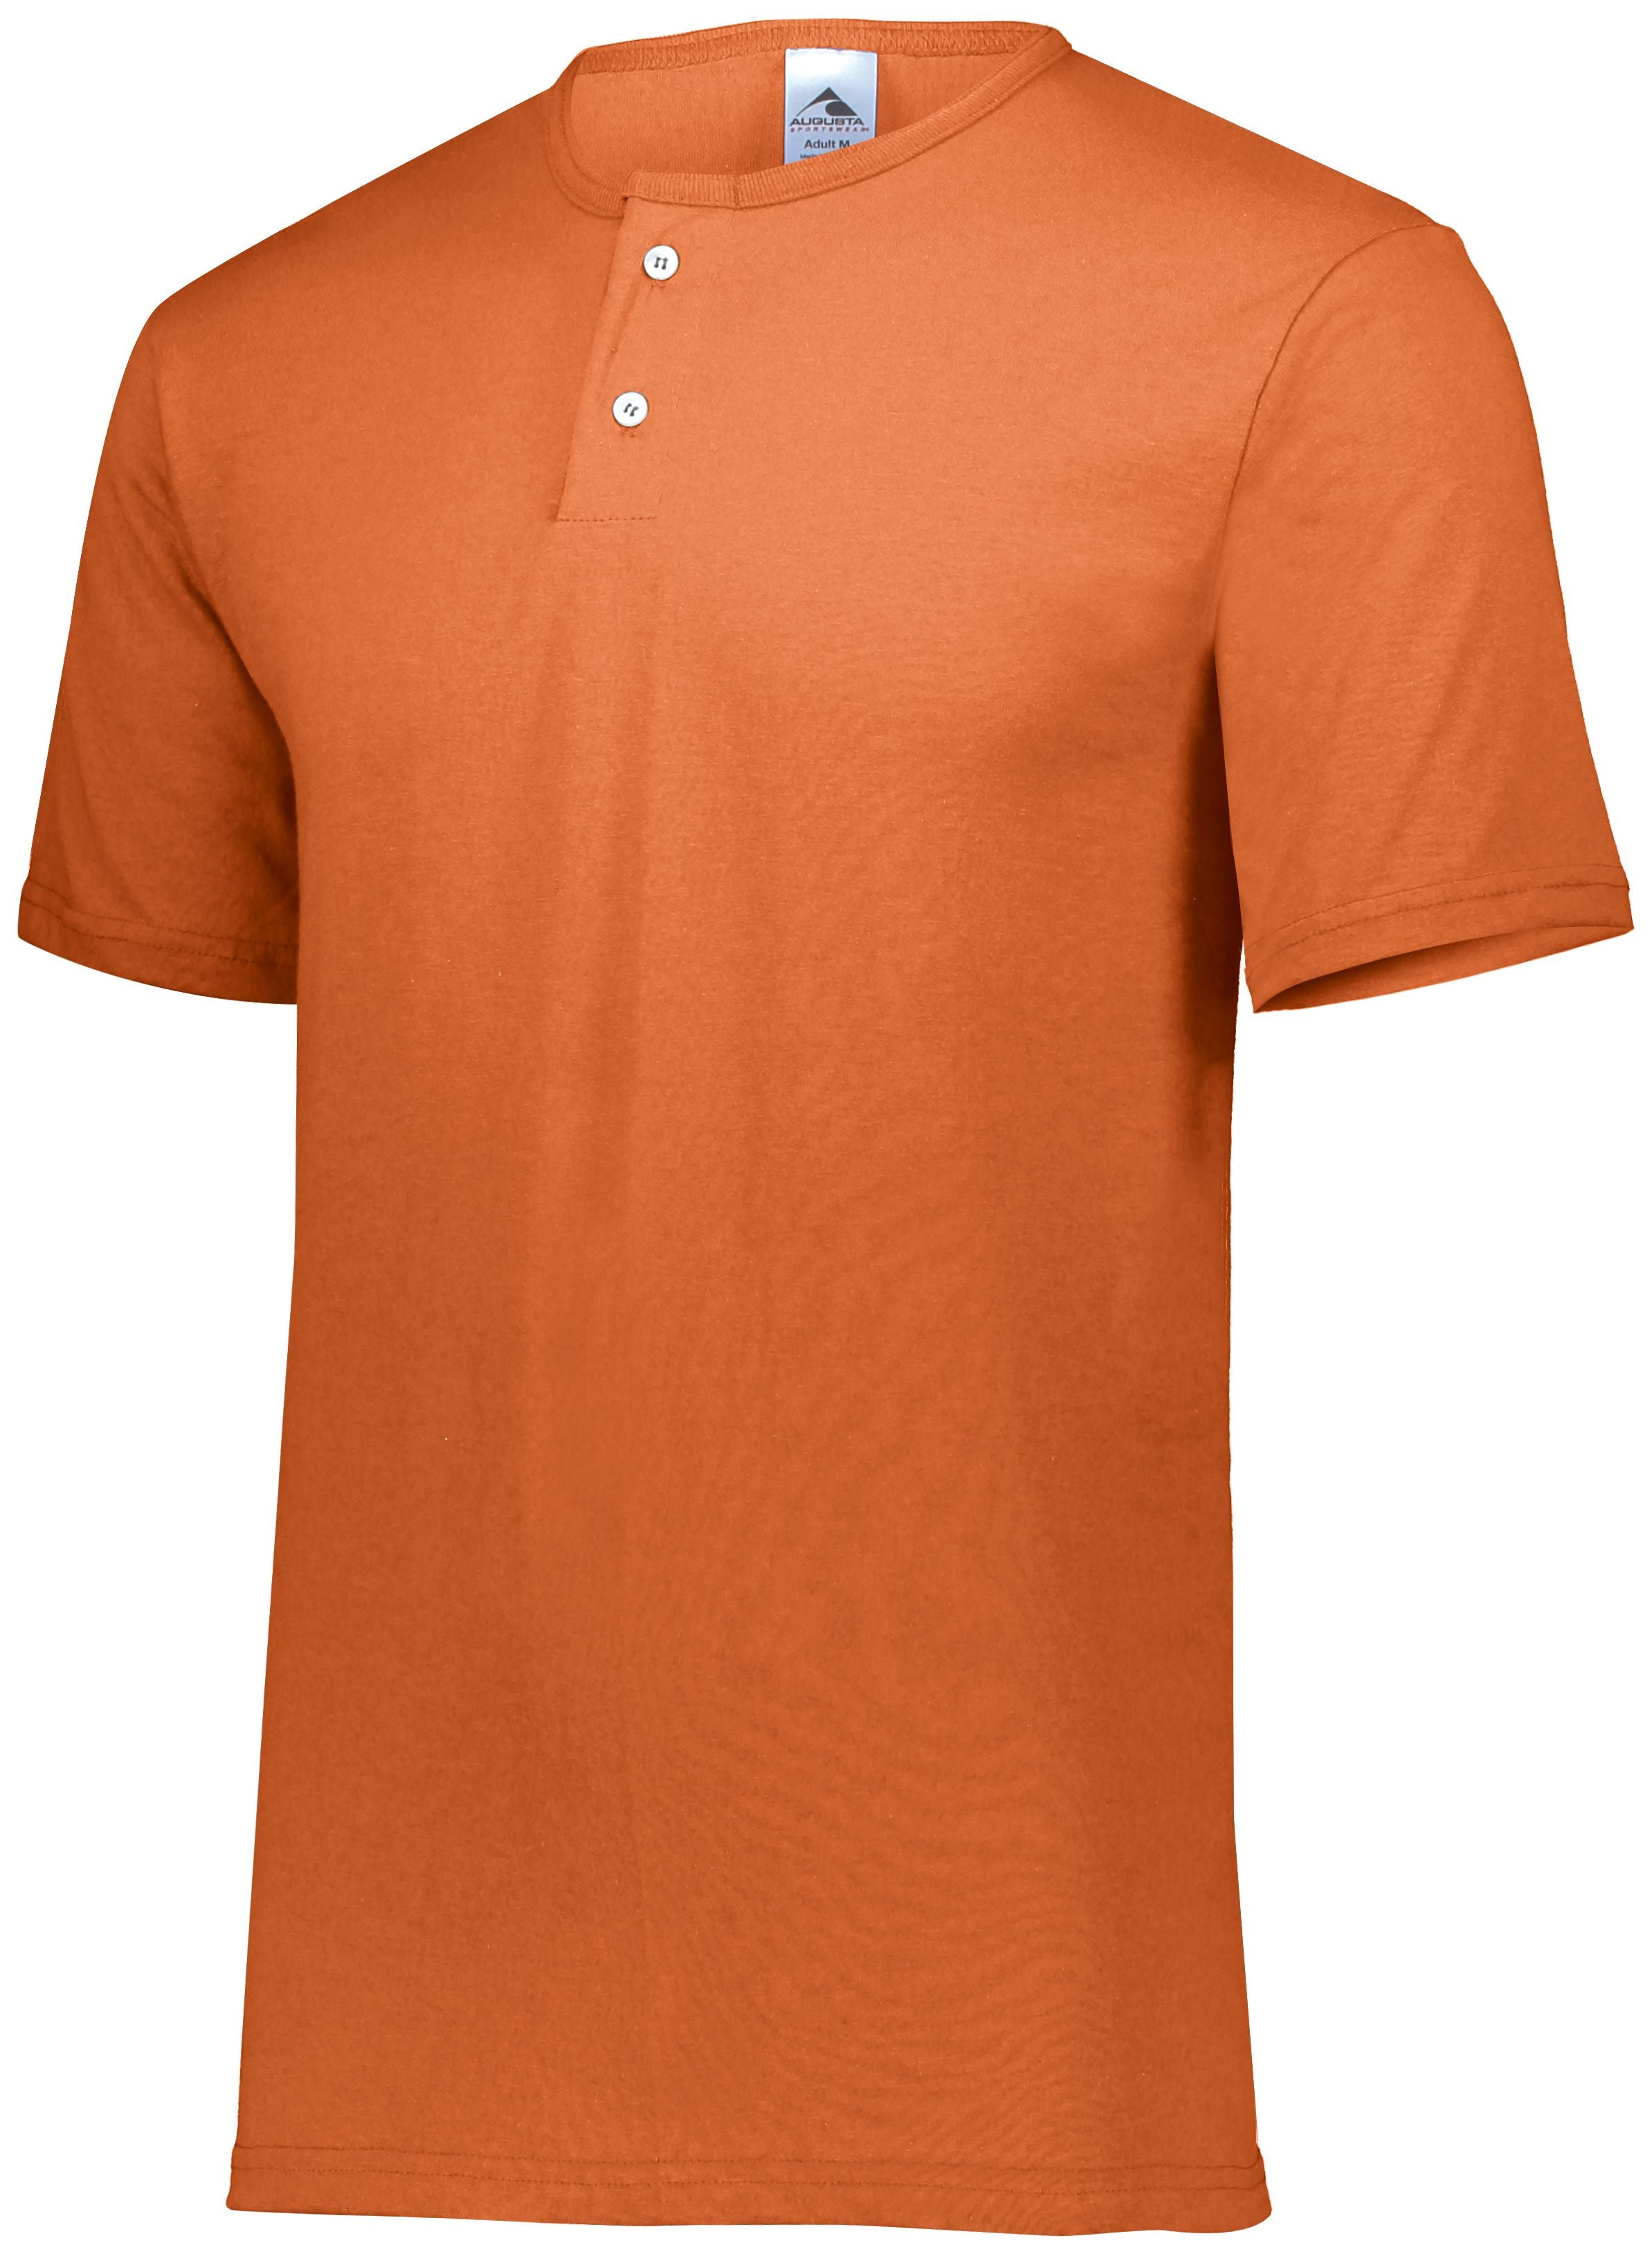 Augusta Sportswear Two-Button Baseball Jersey in Orange  -Part of the Adult, Adult-Jersey, Augusta-Products, Baseball, Shirts, All-Sports, All-Sports-1 product lines at KanaleyCreations.com